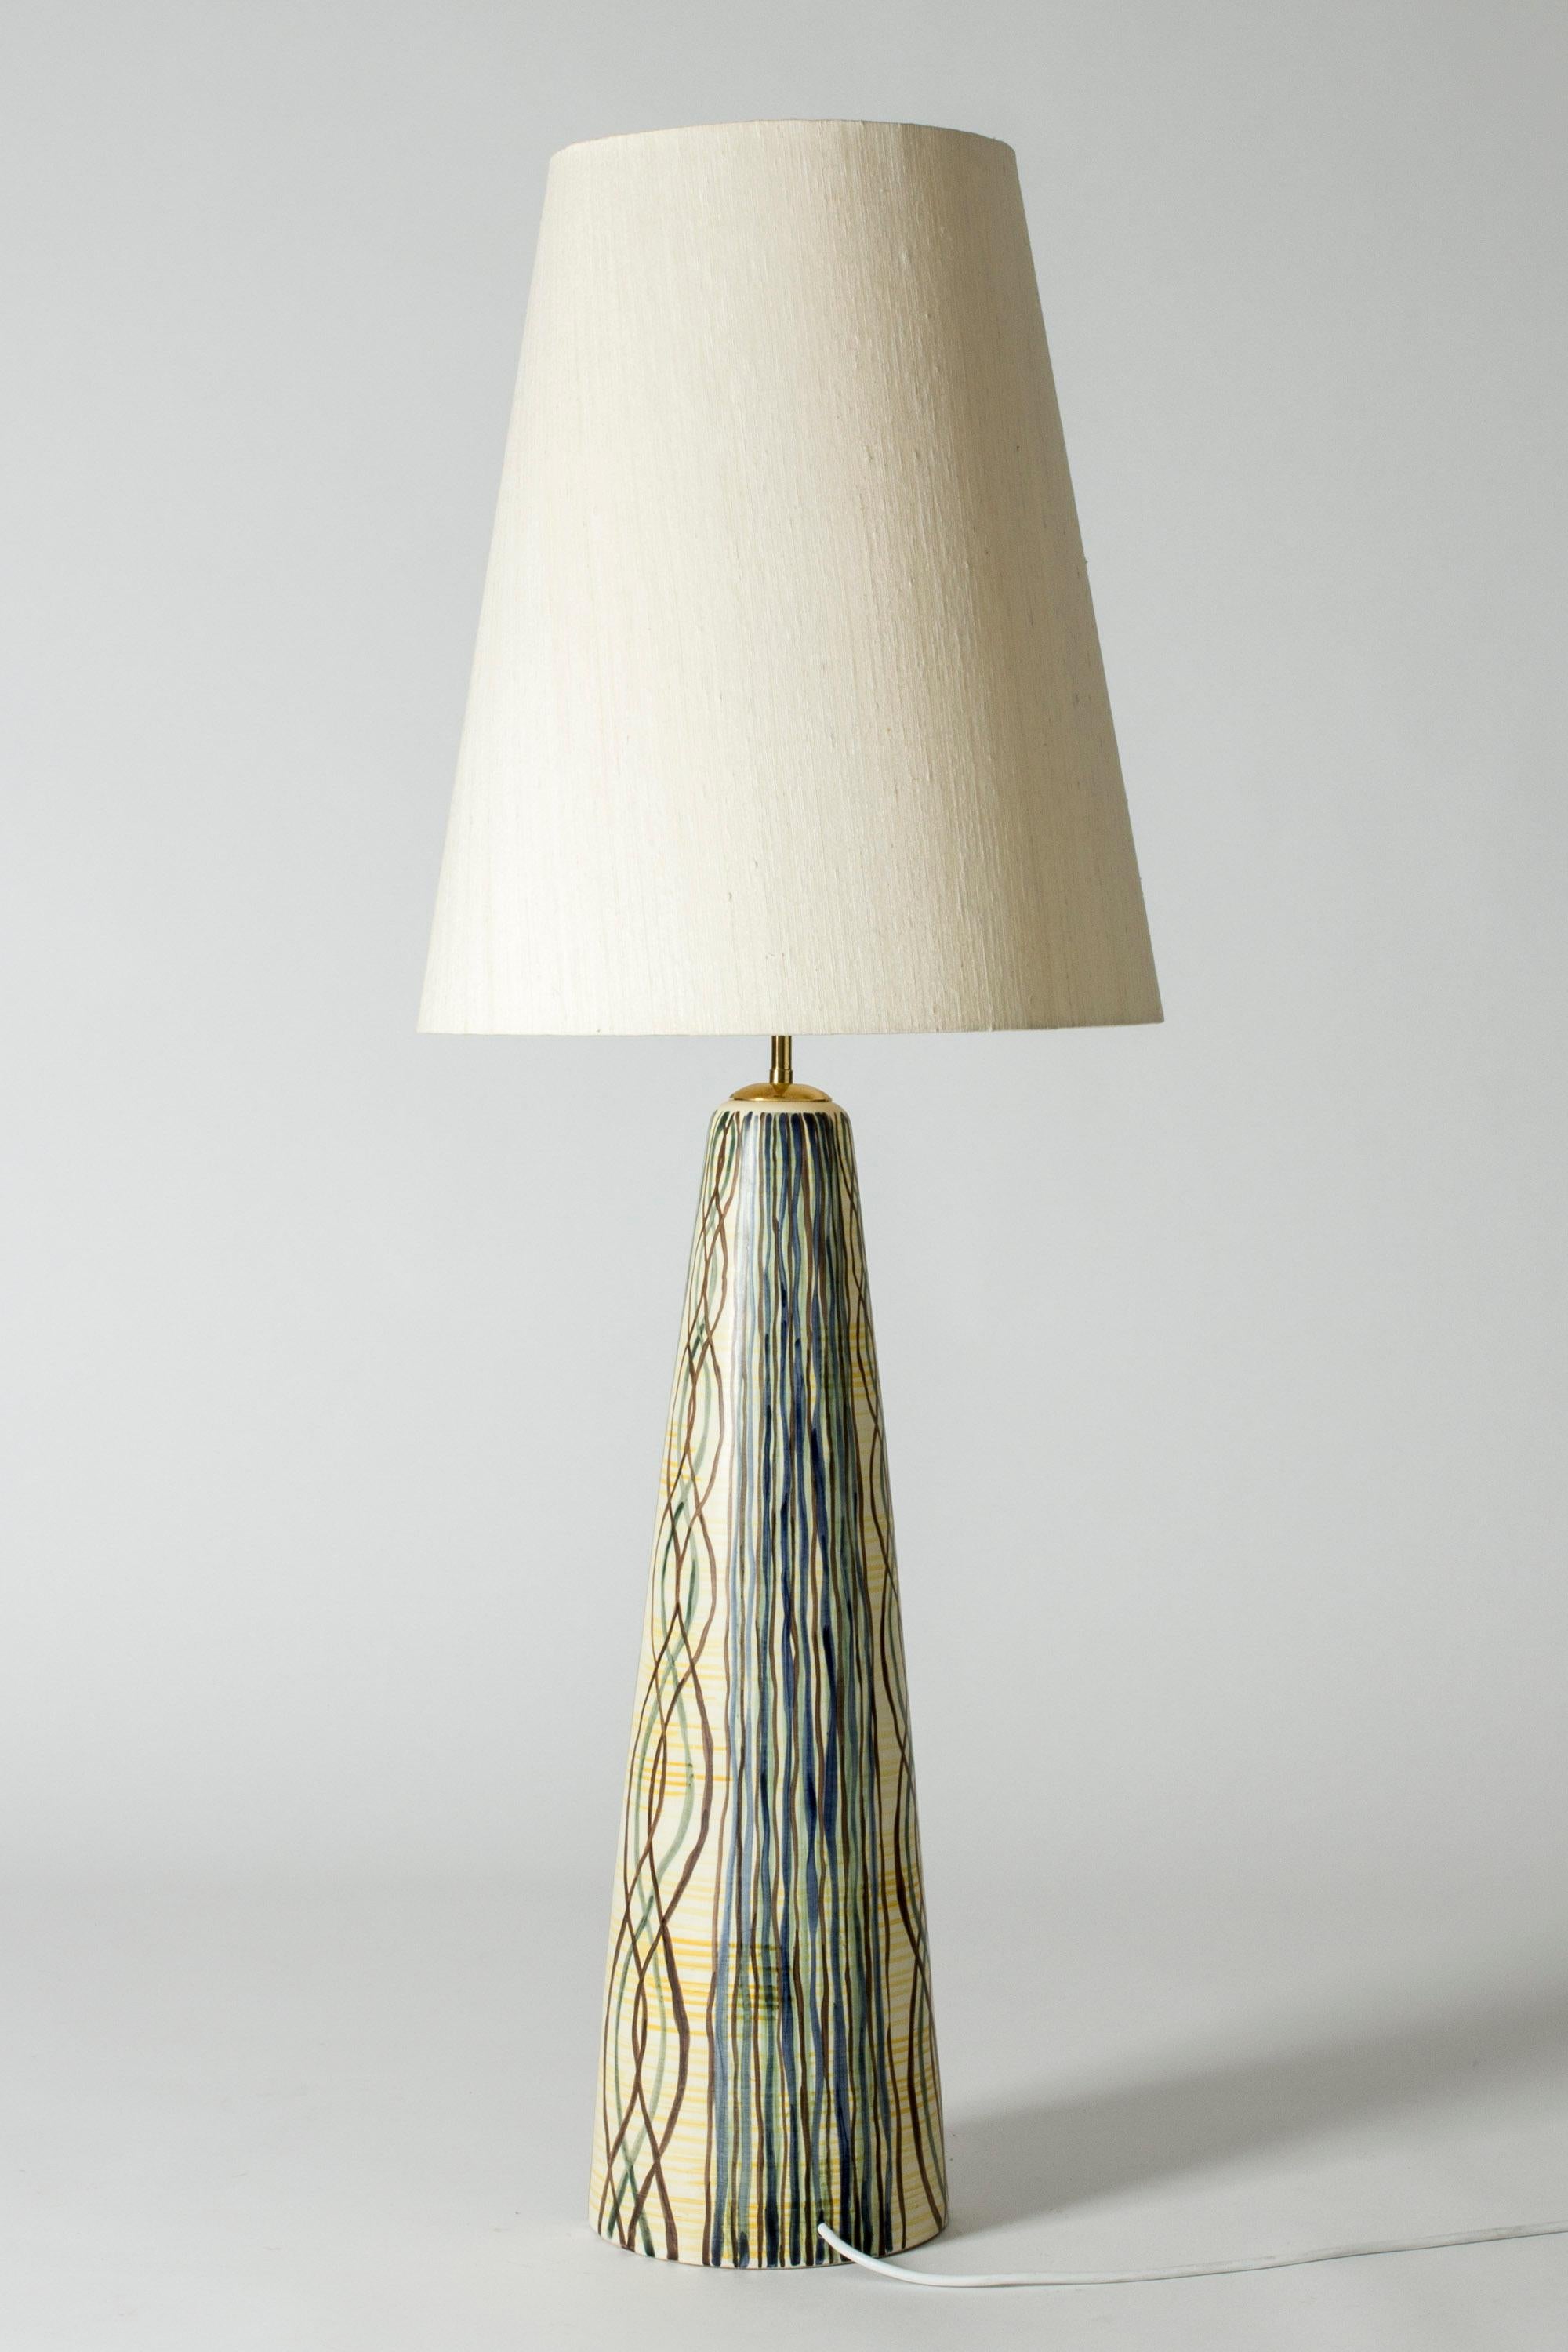 Floor lamp by Rigmor Nielsen, with a heavy, conical ceramic base and oversized original lamp shade. The base is decorated with a beautiful organic pattern of billowing lines in subdued colors.